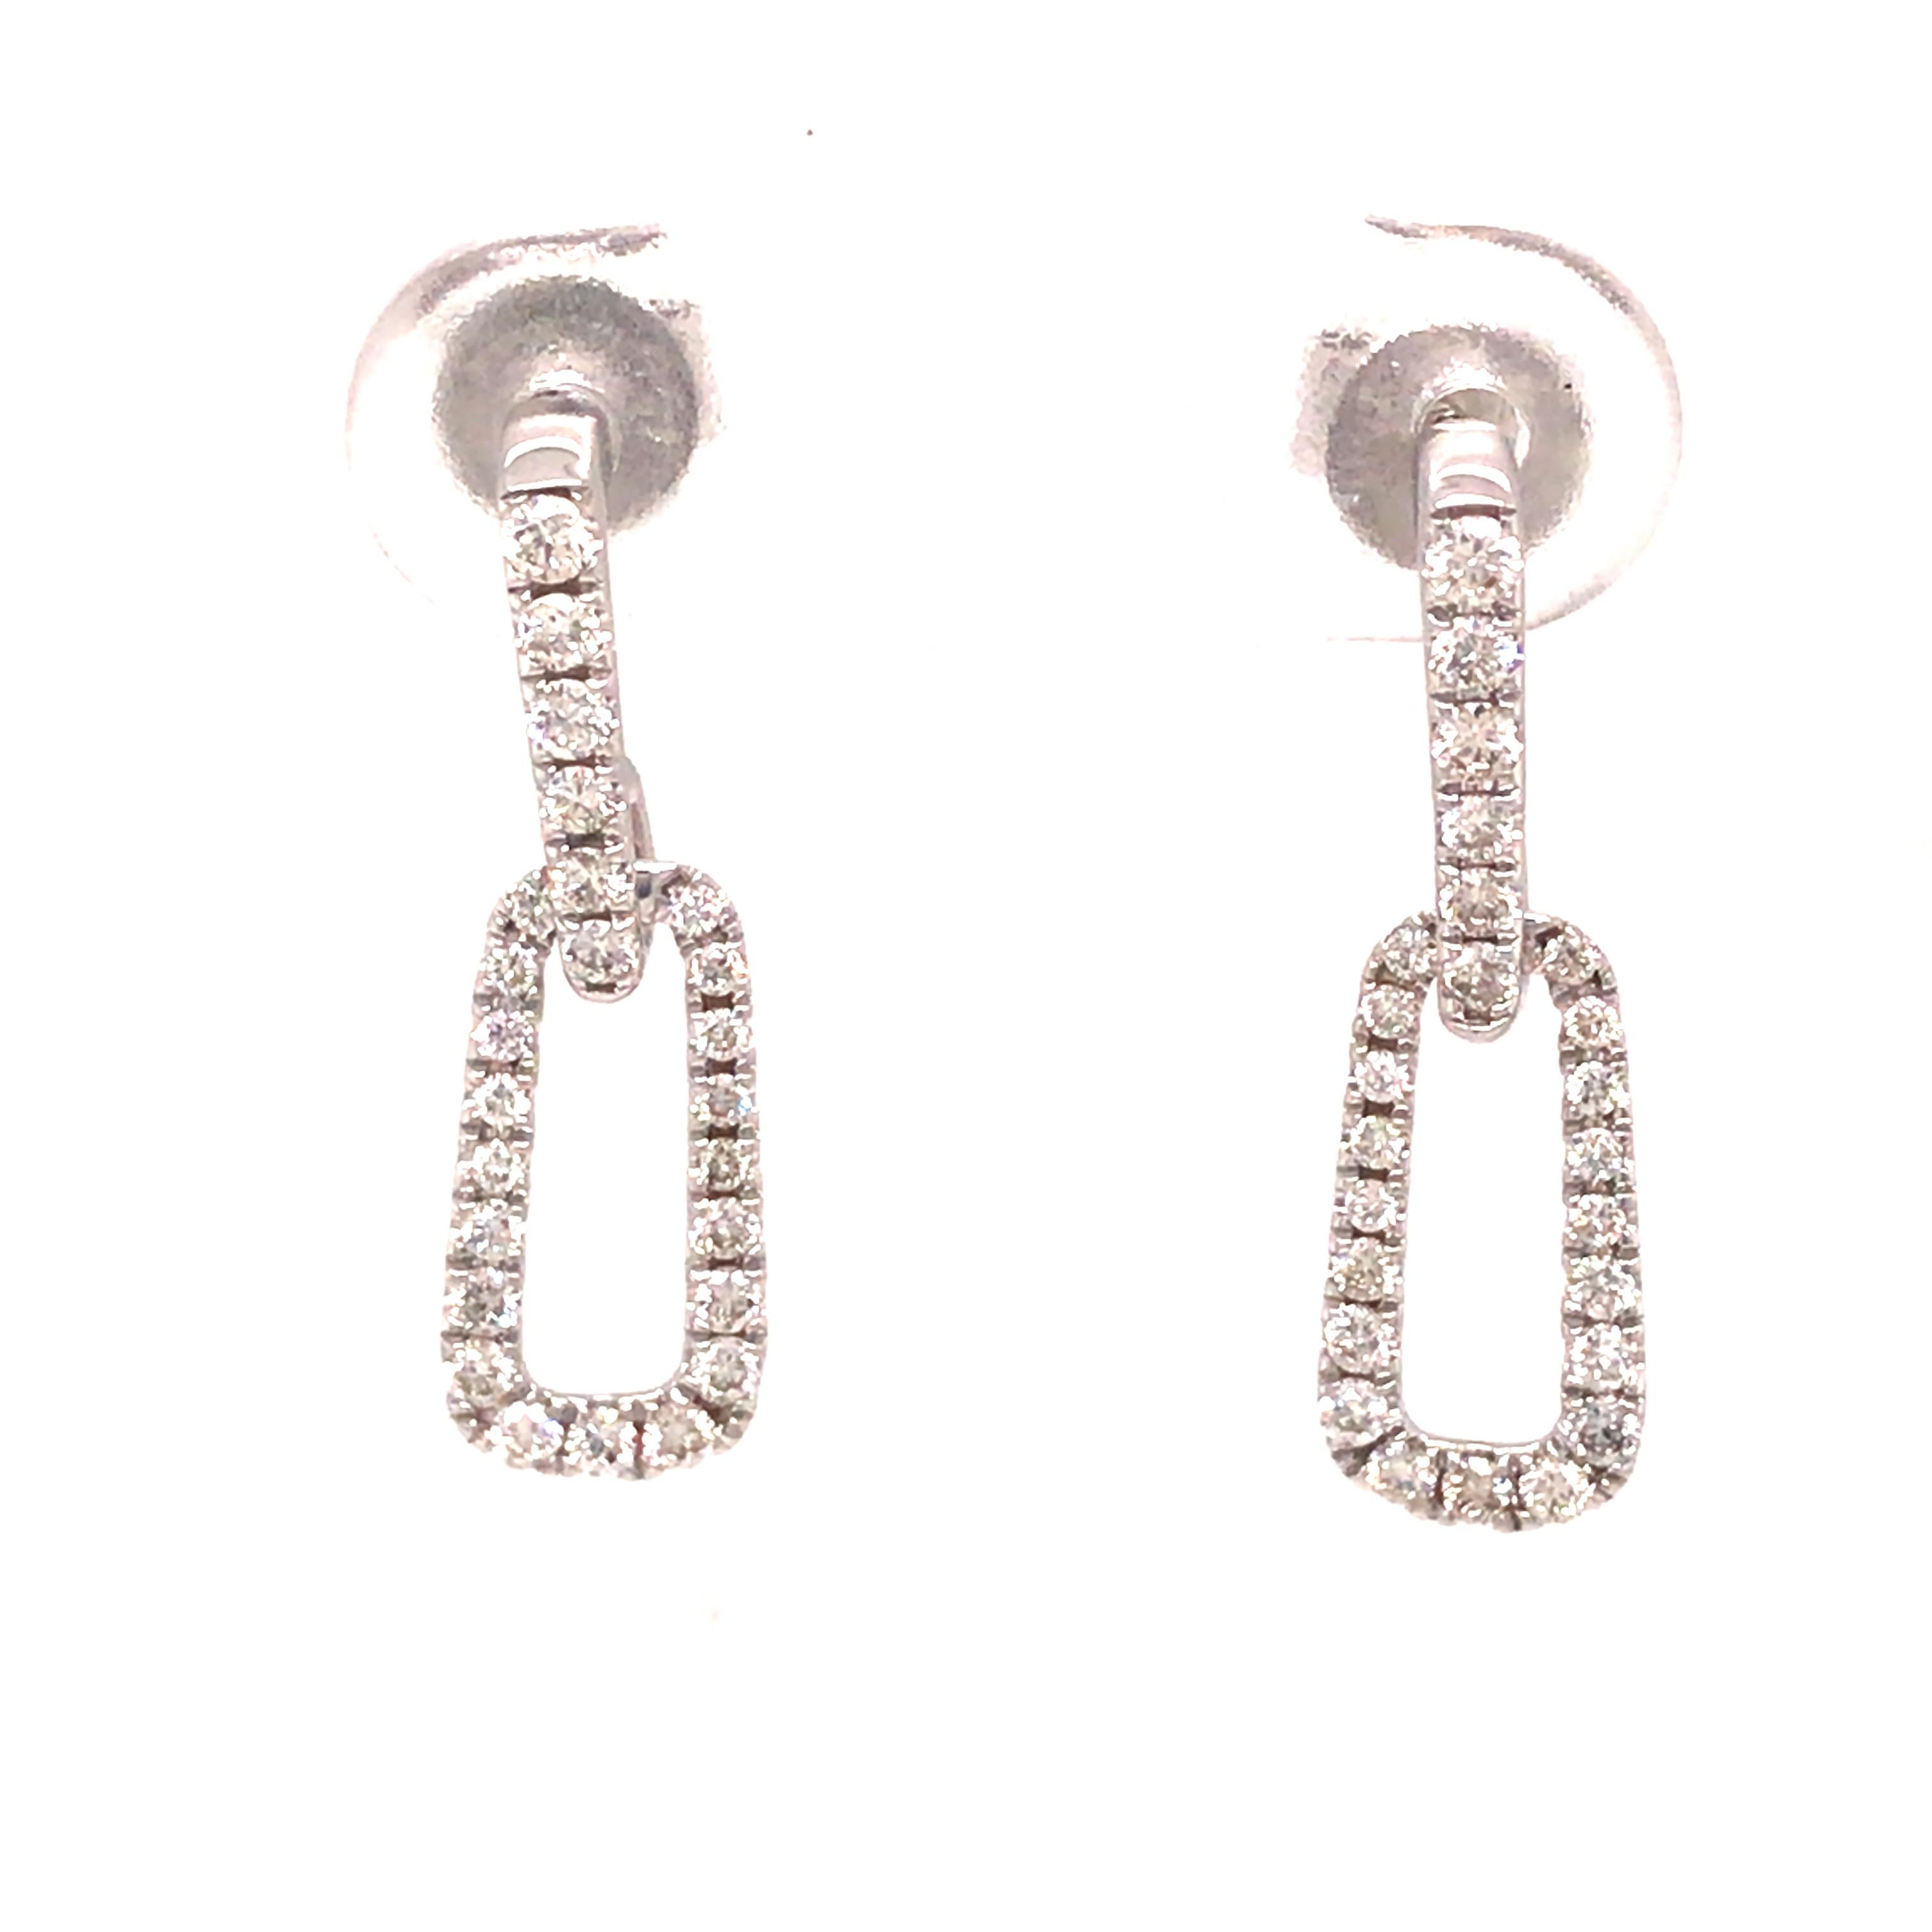 Diamond Dangle Earring in 18K White Gold.  (50) Round Brilliant Cut Diamonds weighing 0.45 carat total weight, G-H in color and VS in clarity are expertly set.  The Earrings measure 3/4 inch in length and 1/4 inch in width.  2.30 grams.